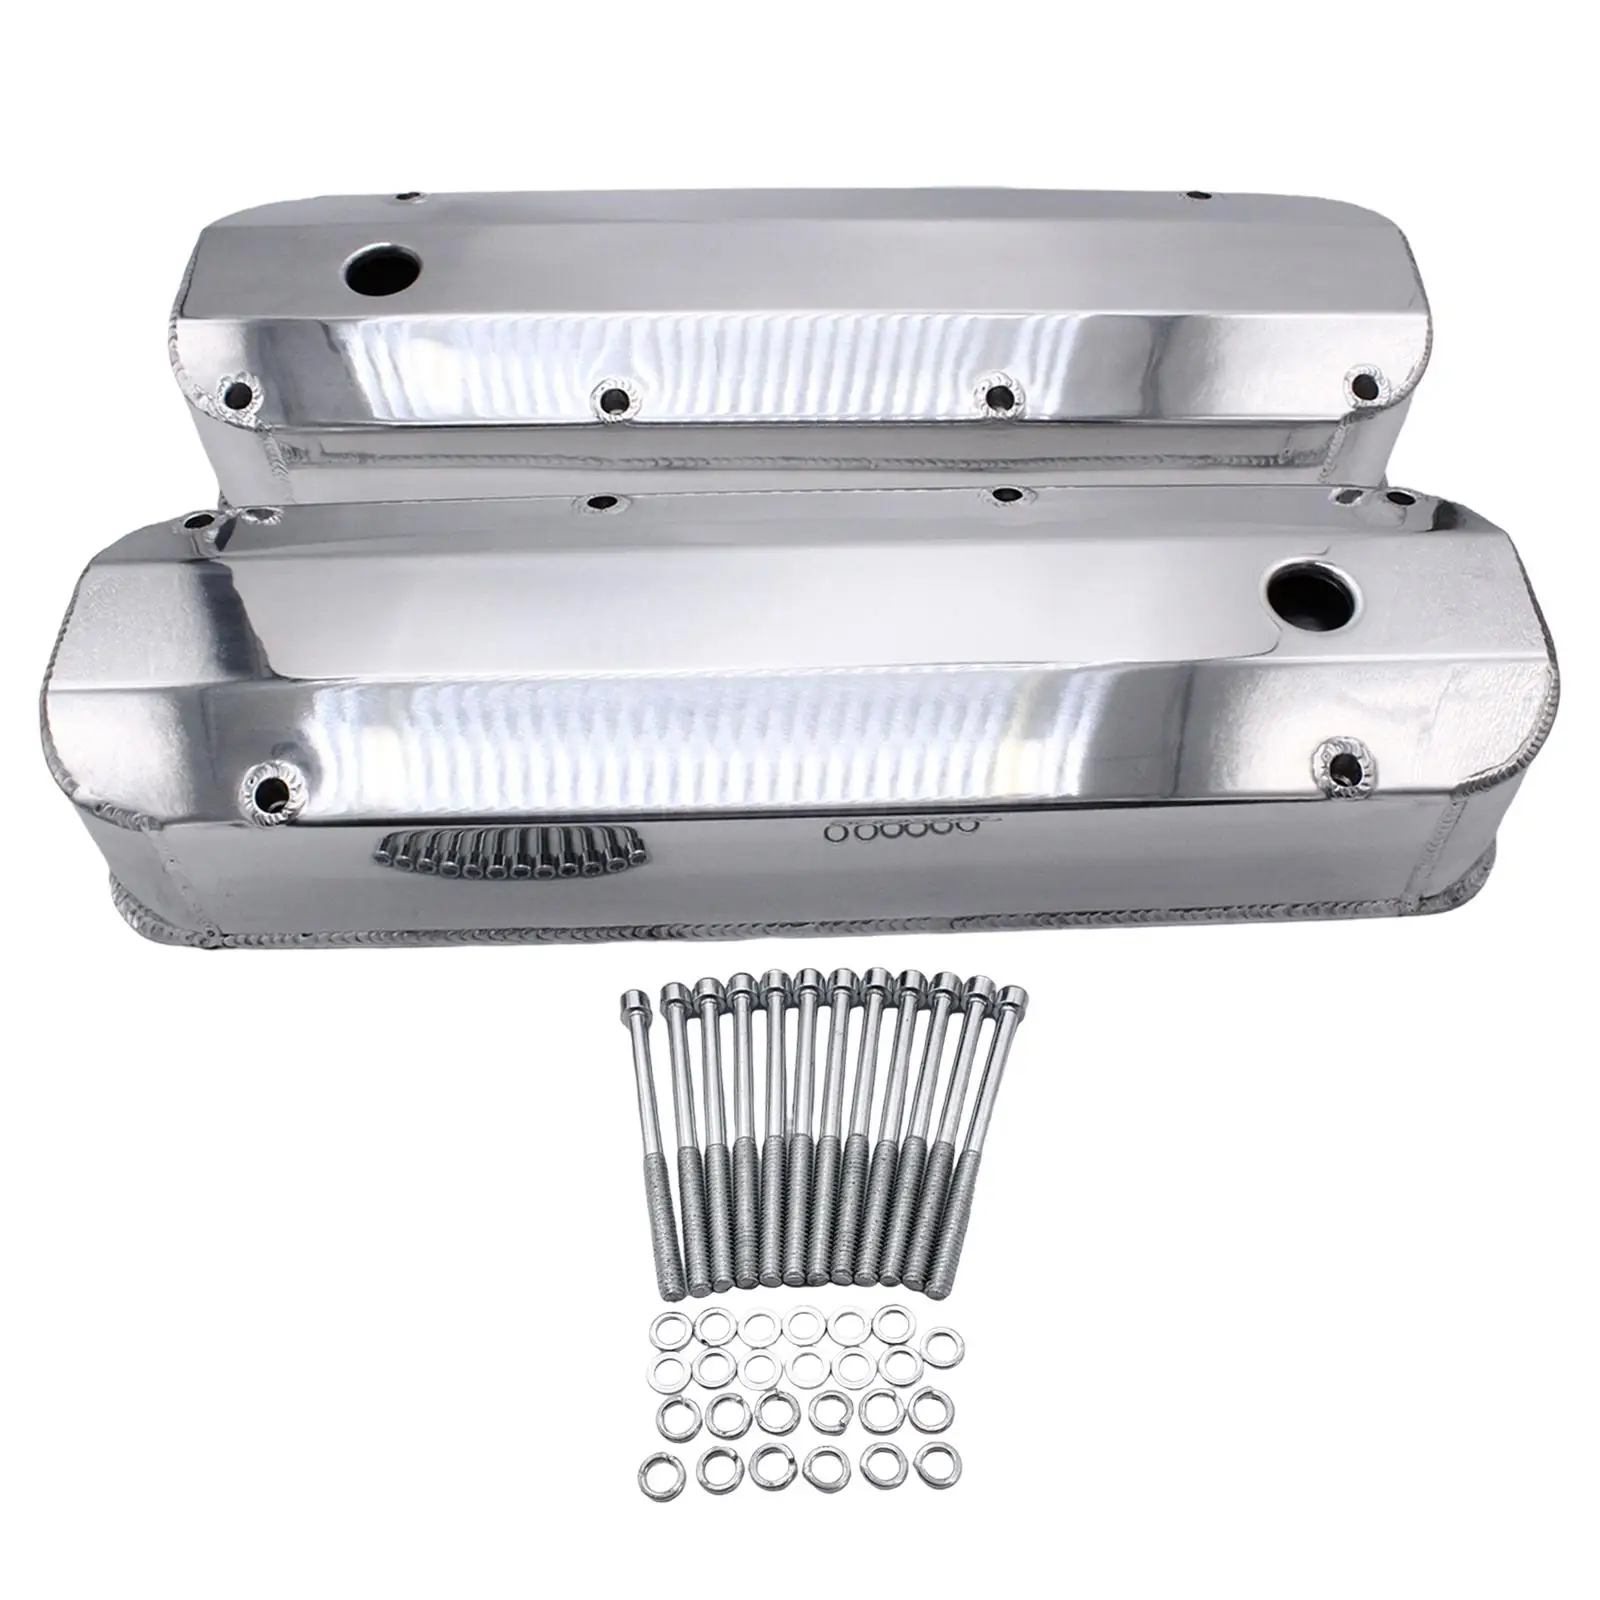 Valve Covers Replace Parts for Ford Big Block 429 460 High Performance